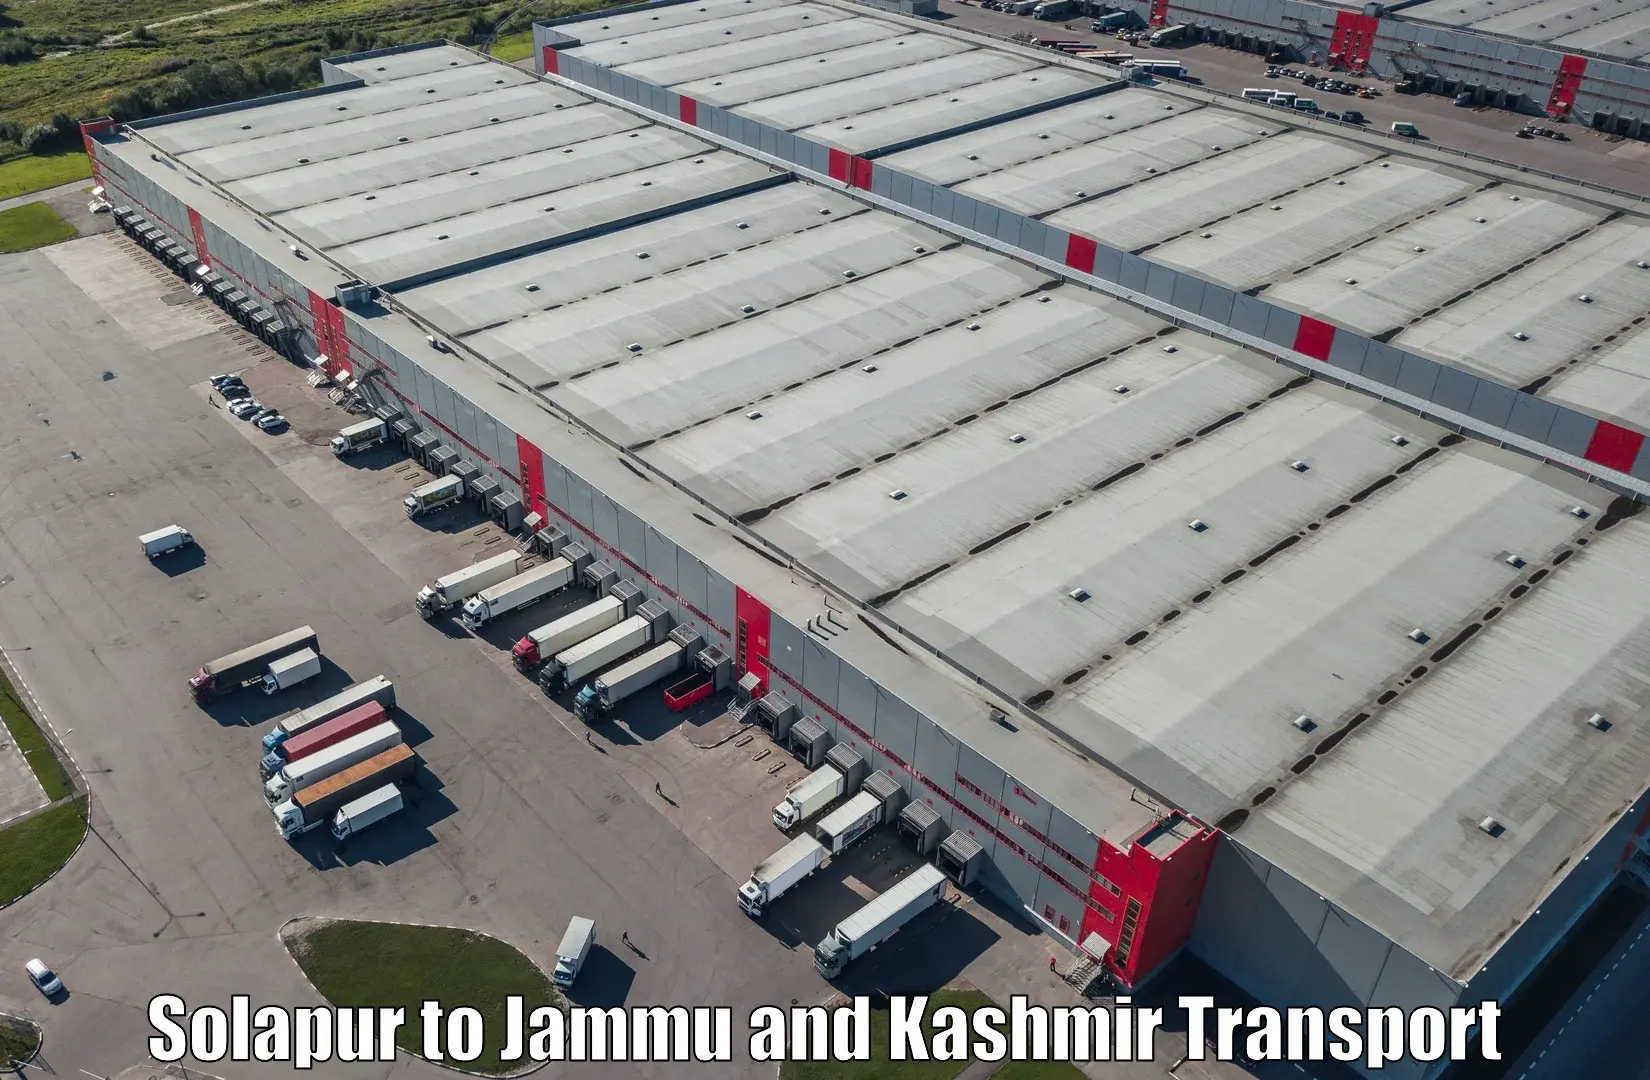 Truck transport companies in India Solapur to Bhaderwah